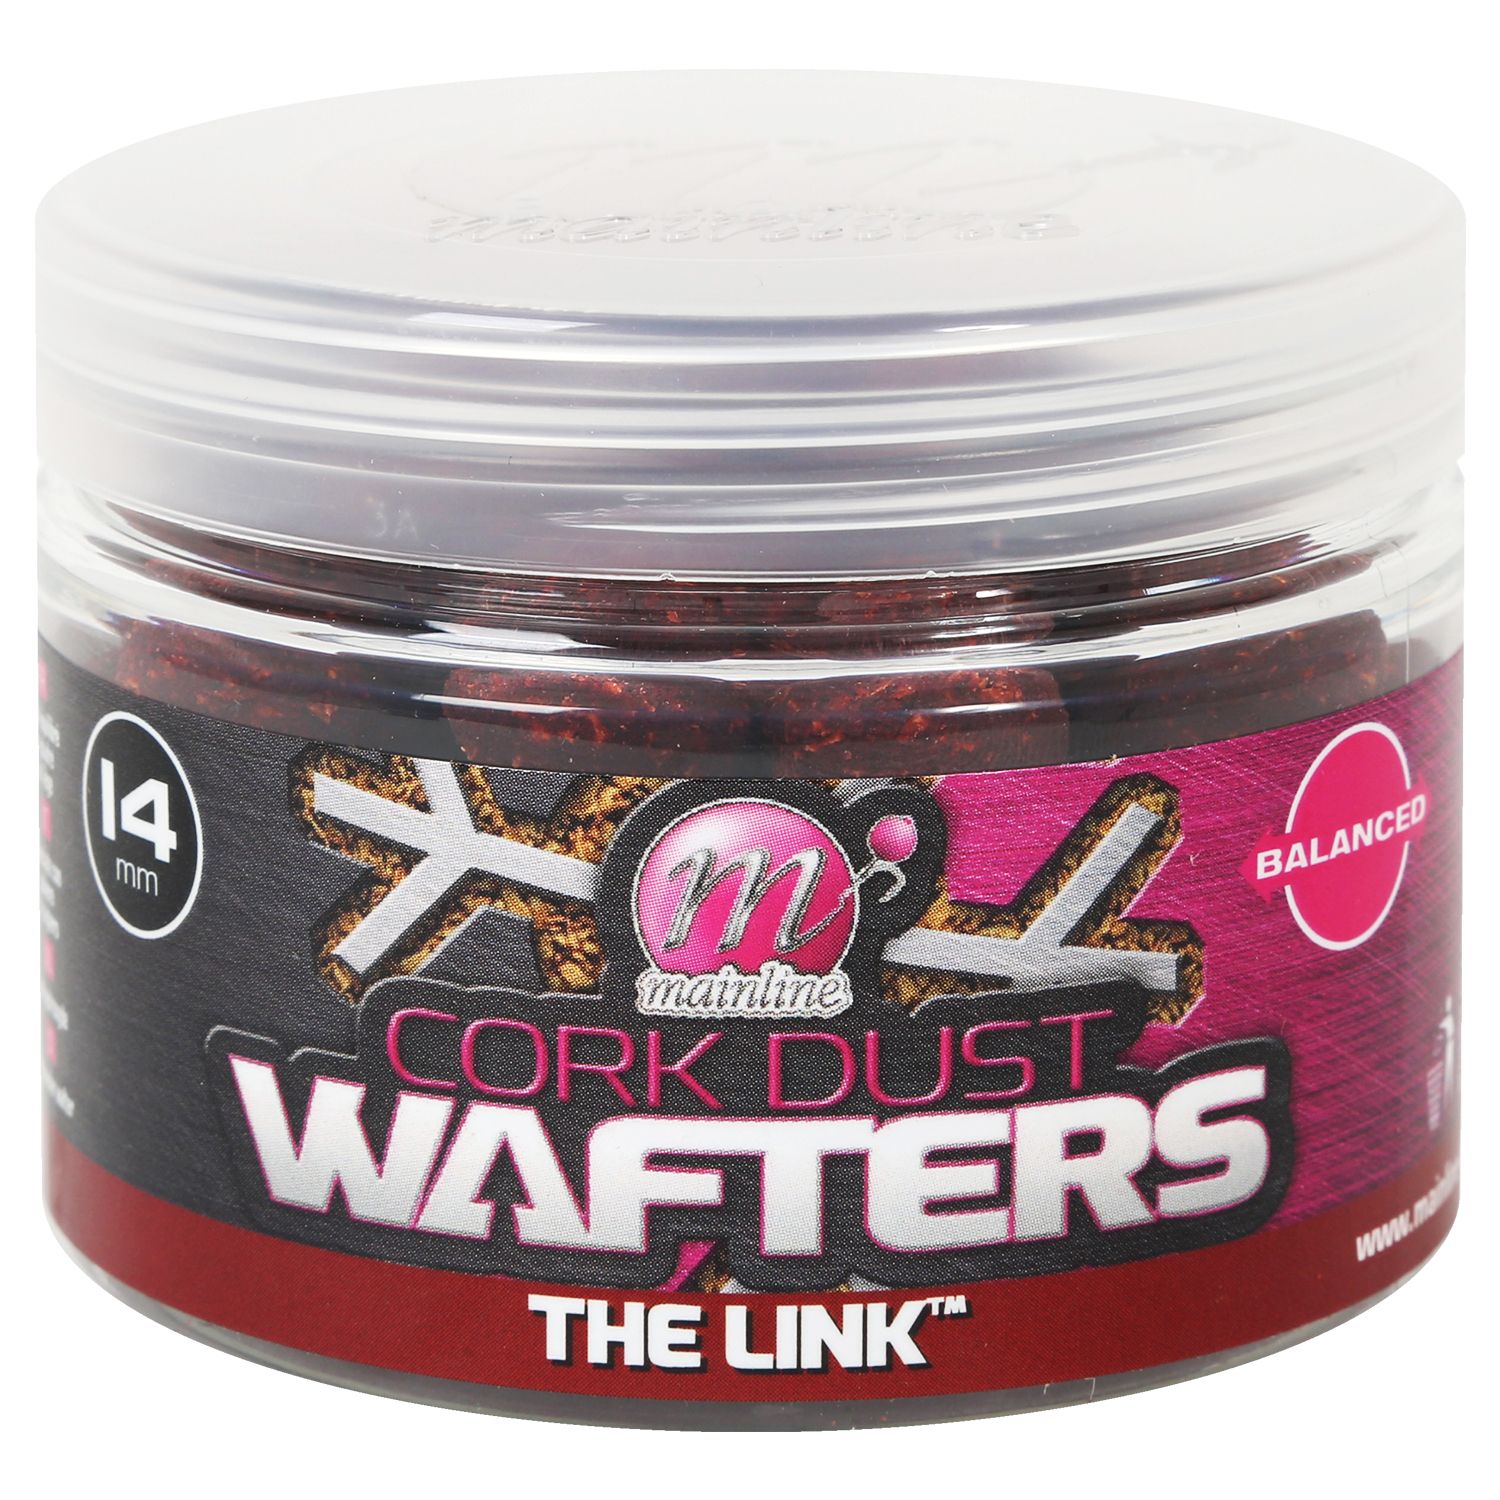 Mainline 14mm Cork Dust Wafters - The Link 150ml